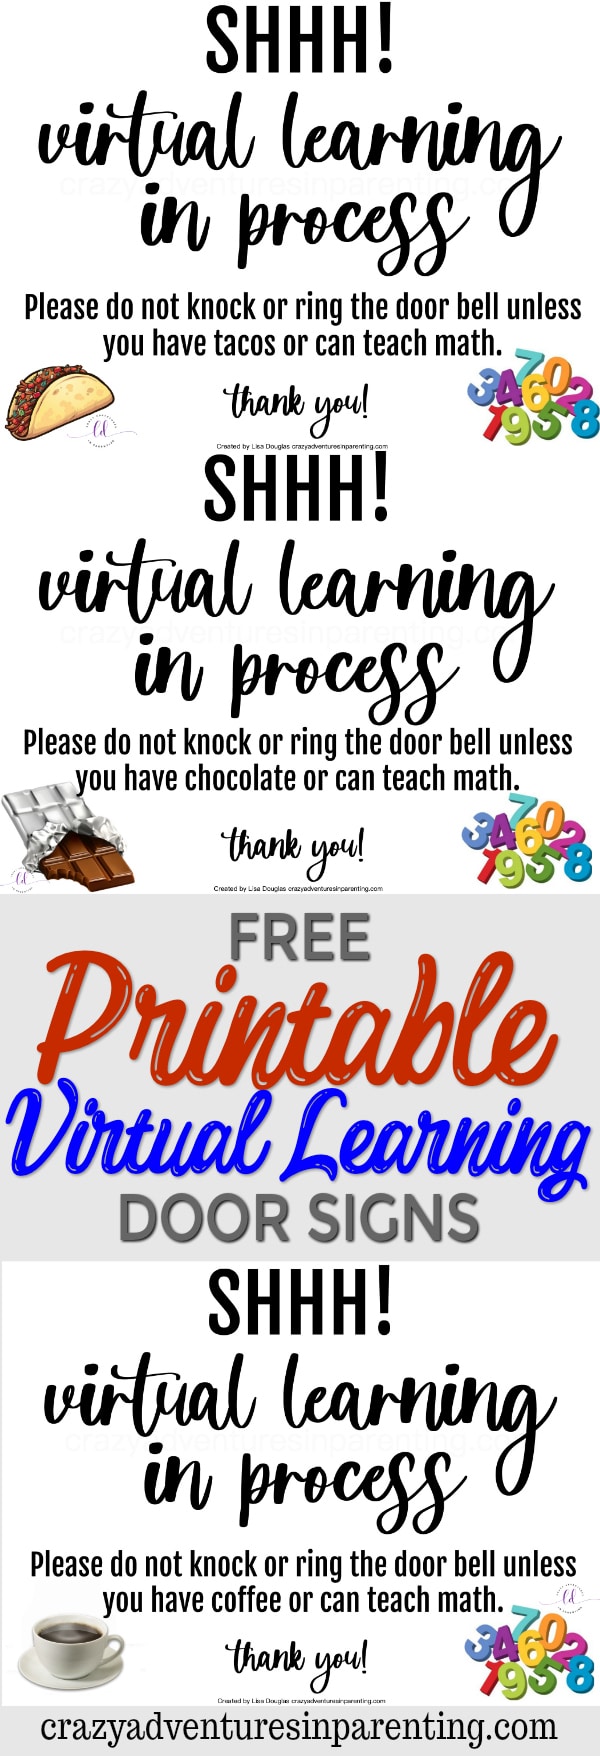 Free Printable Door Signs for E-Learning